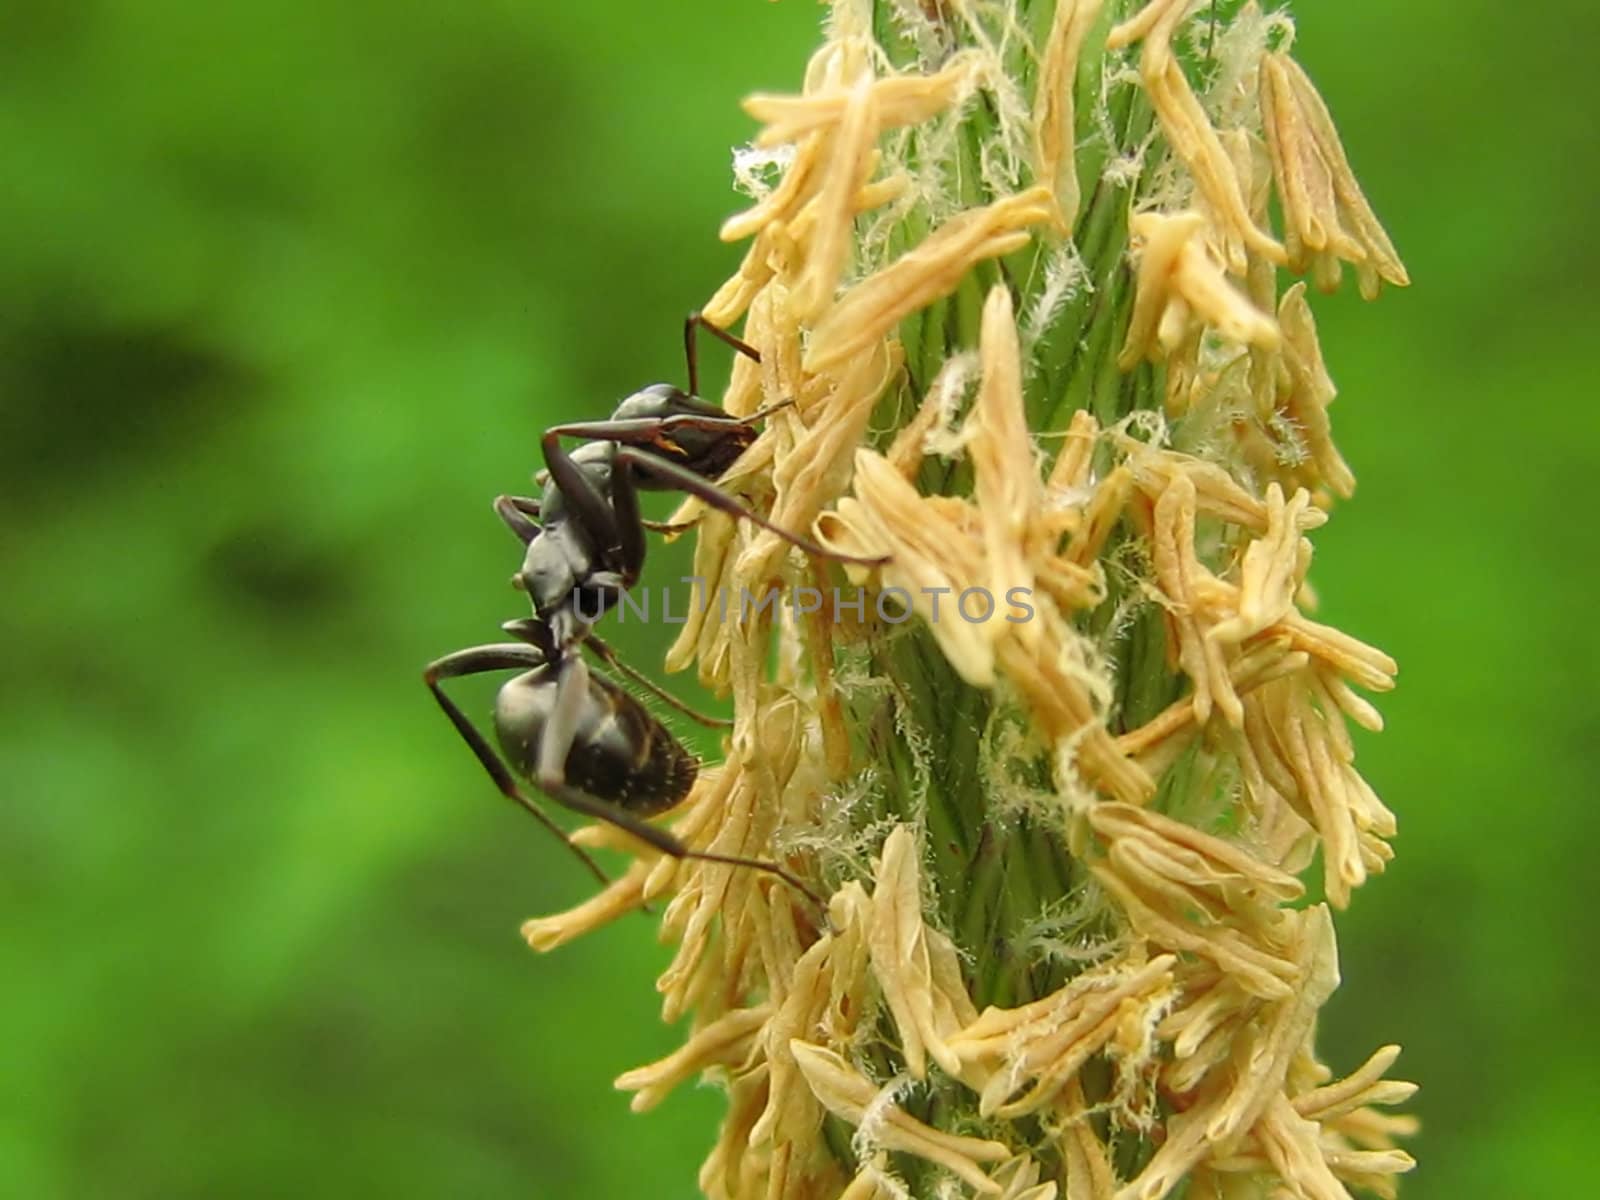 A photograph of an ant on a flower.